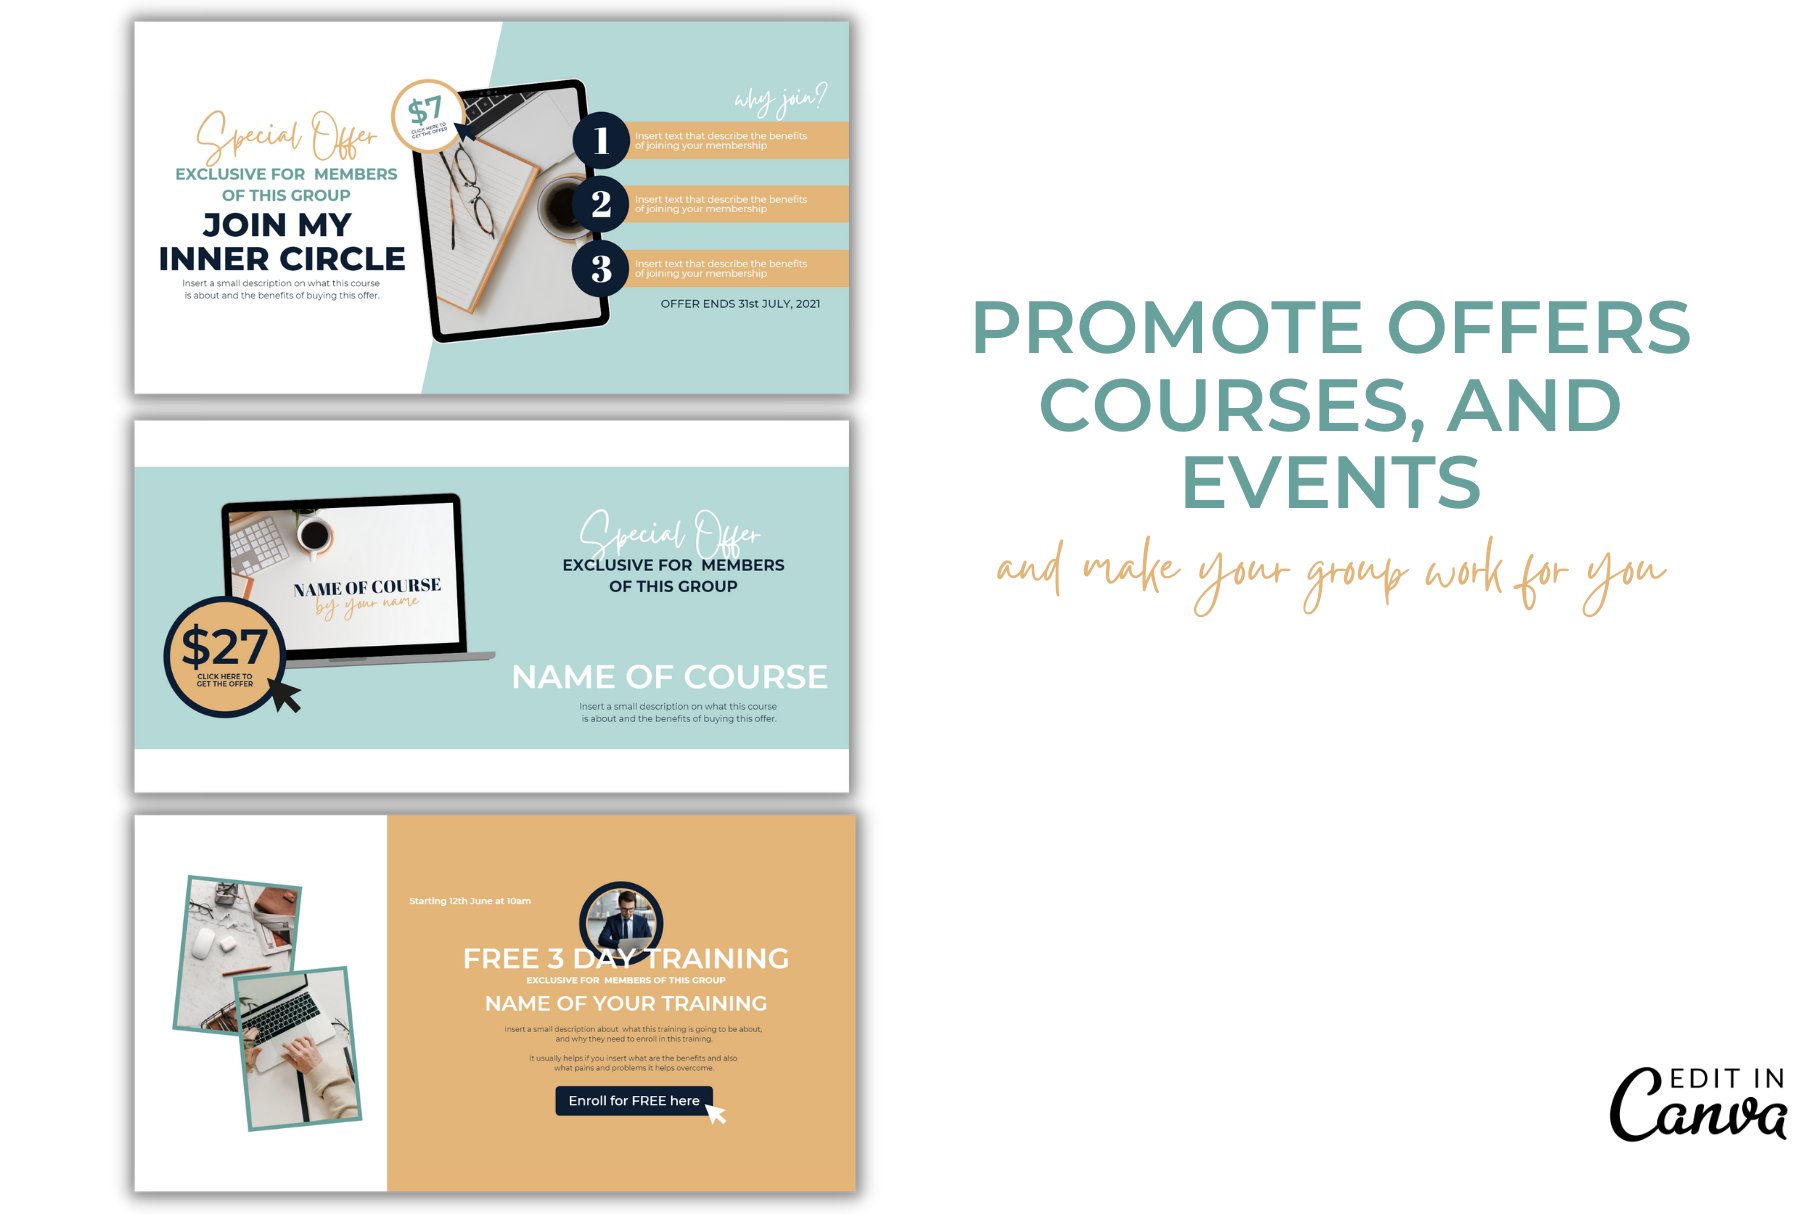 Promote courses, events and offers.